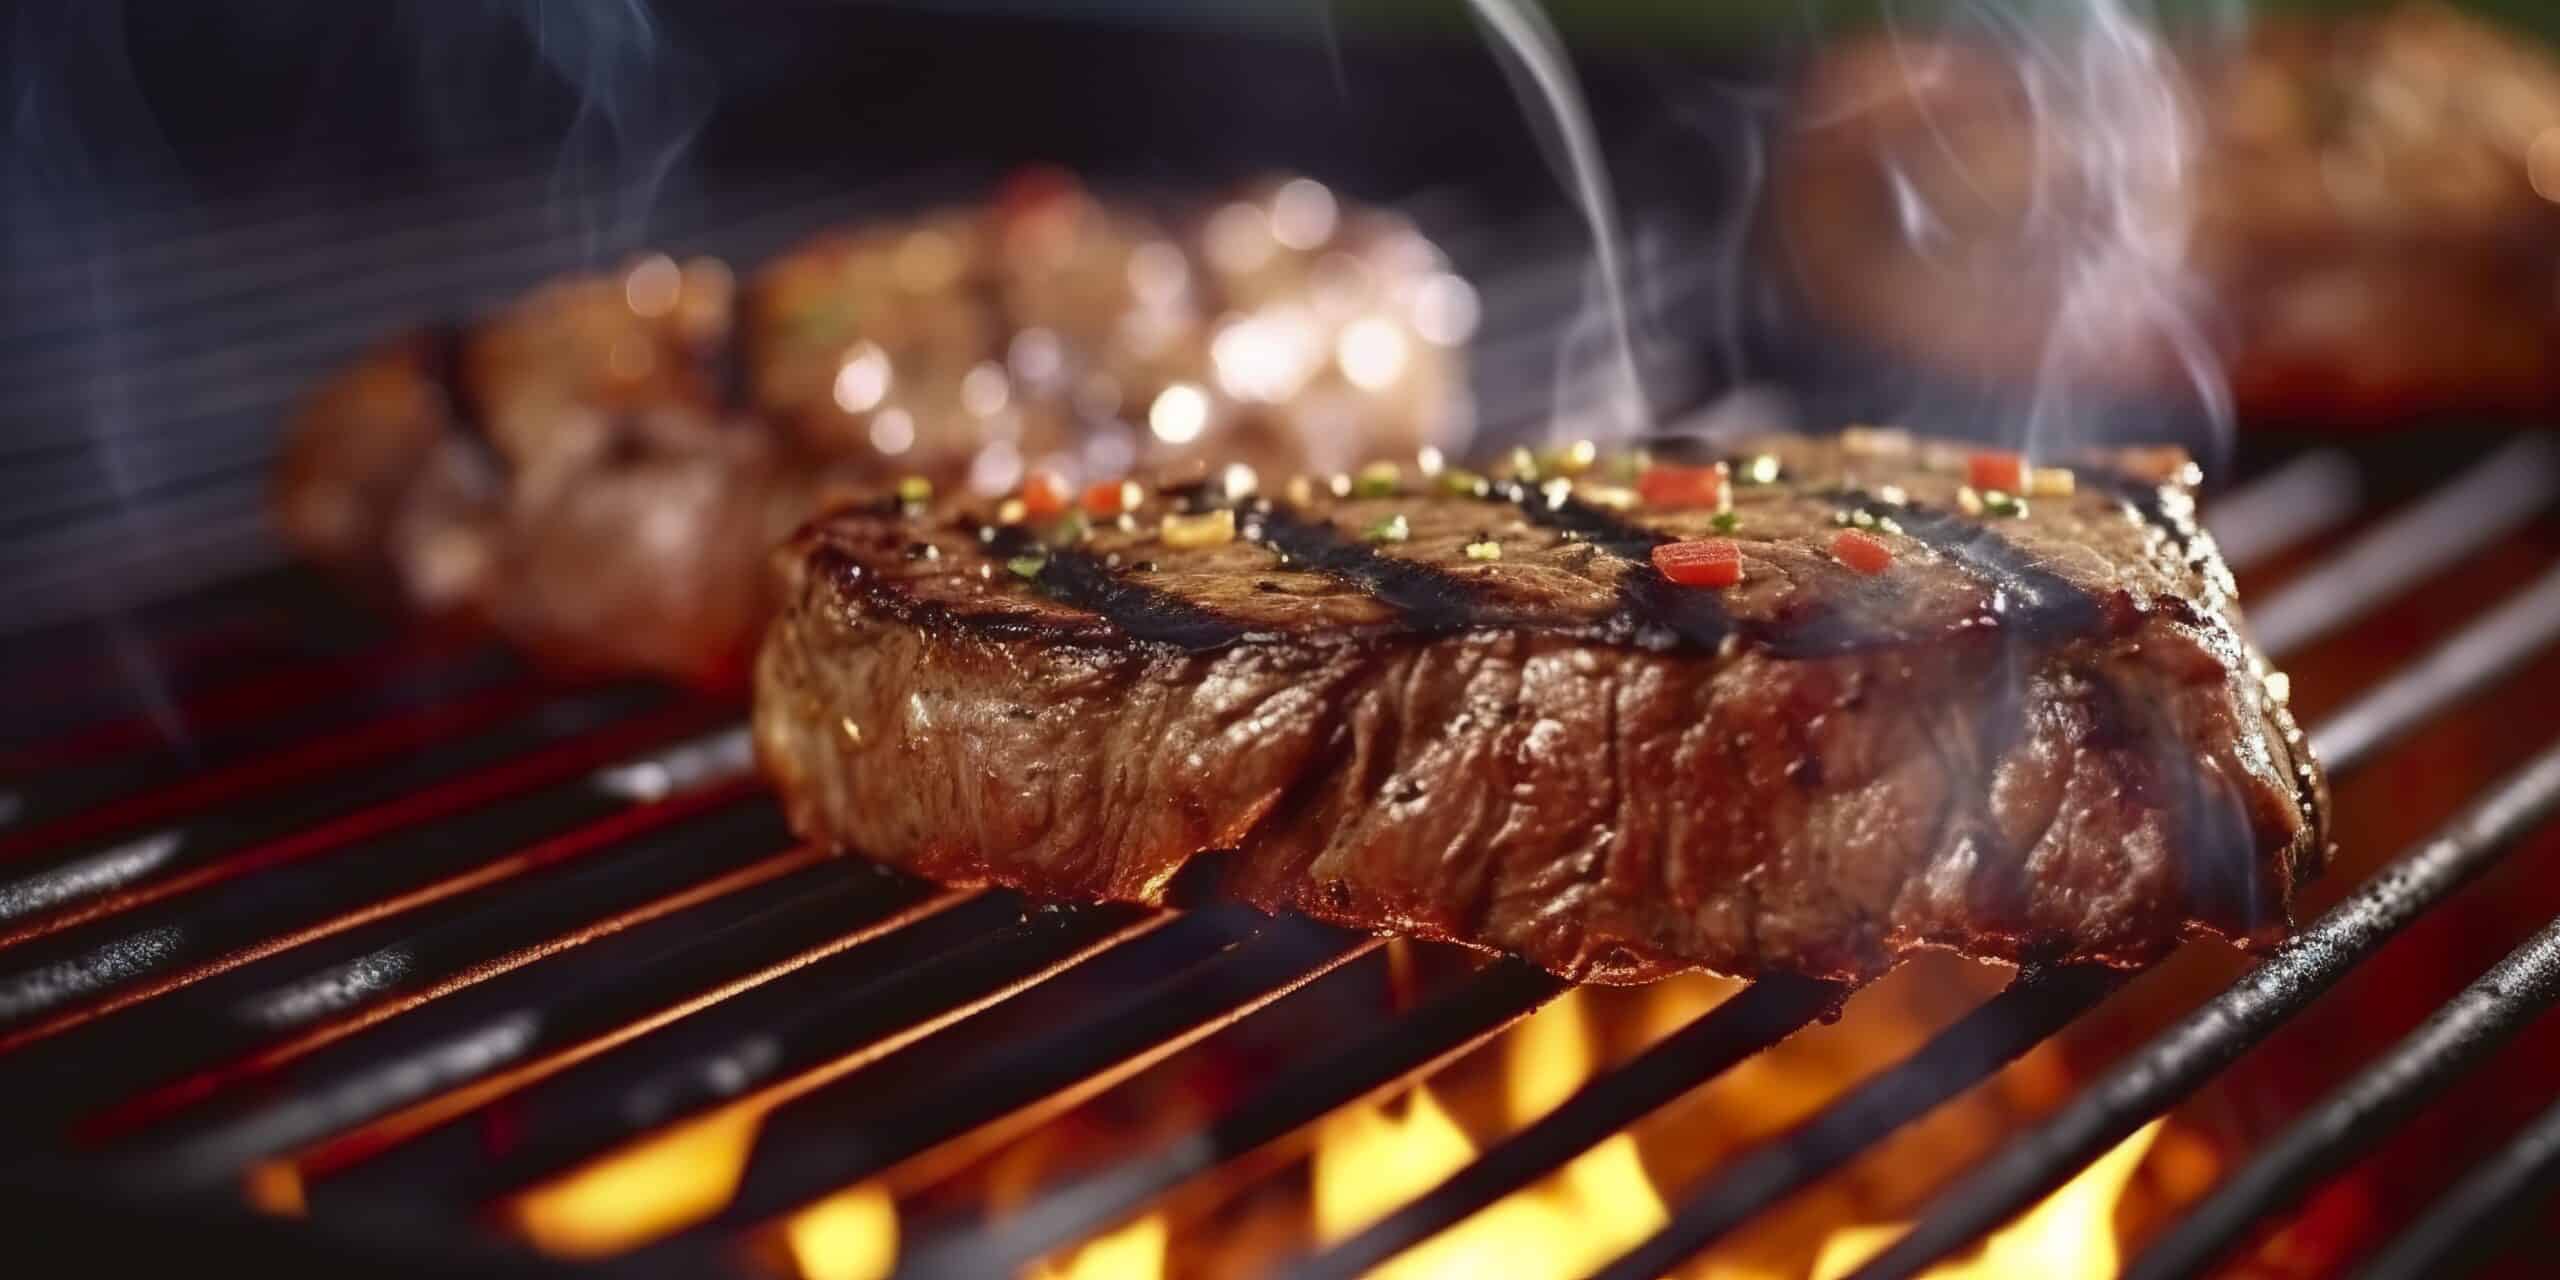 www.appr.com : How To Cook Steak On Gas Grill?